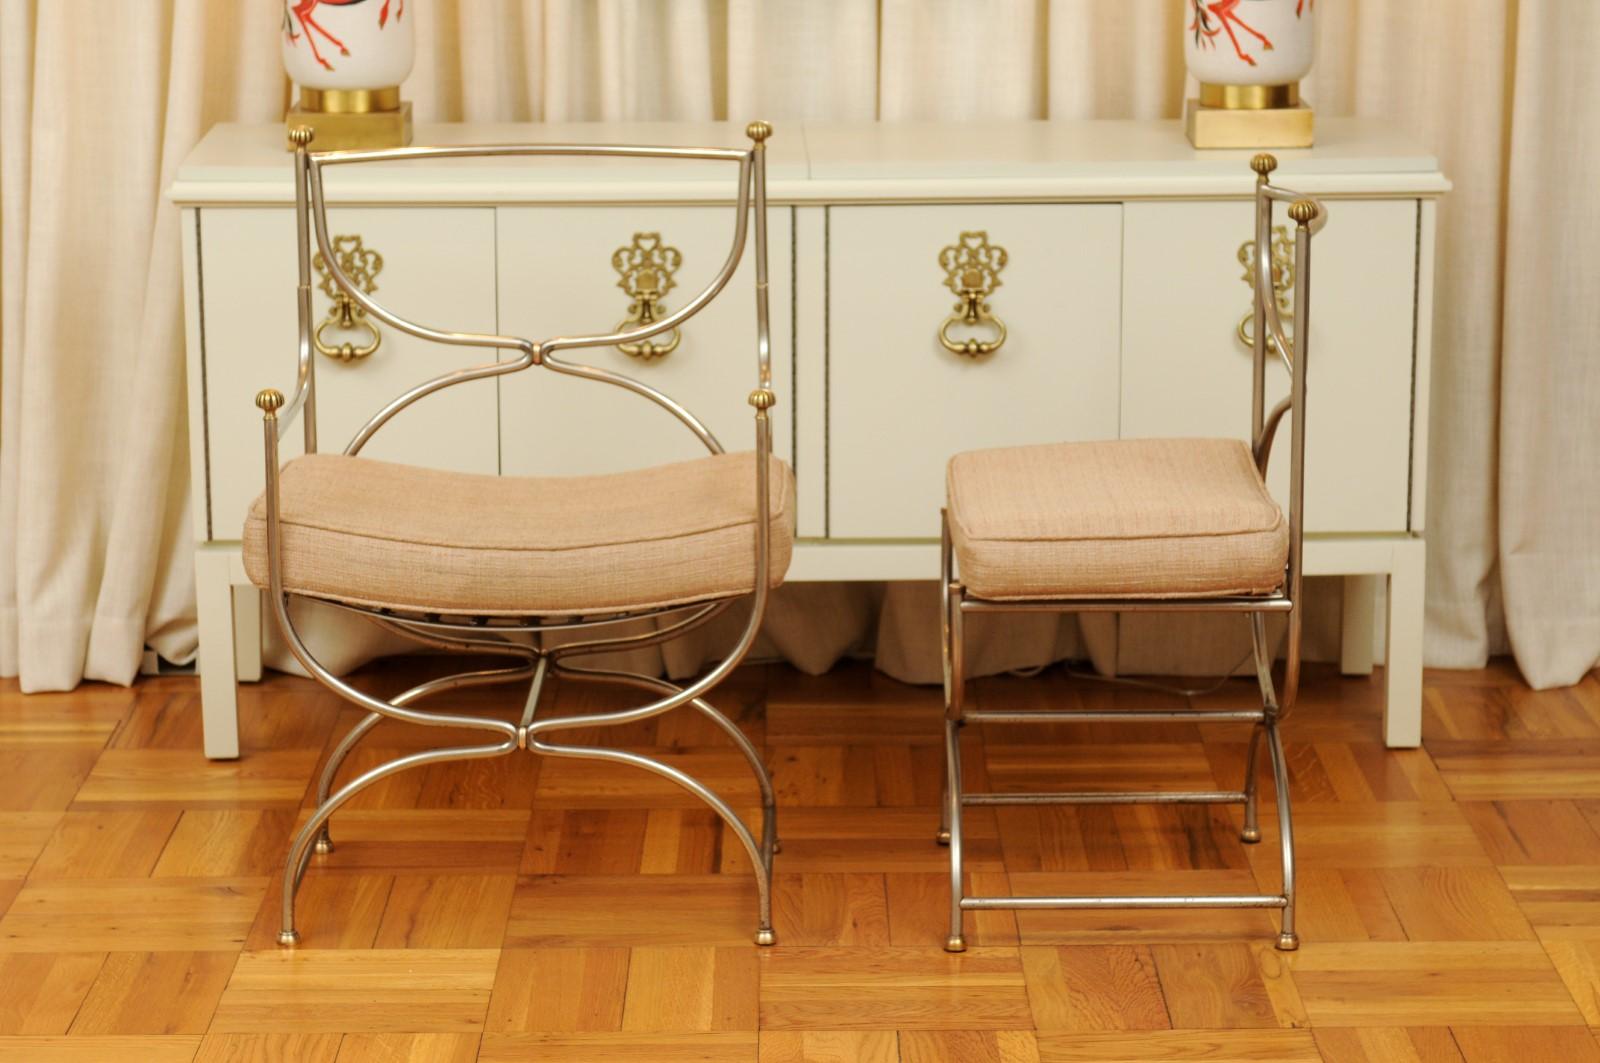 Breathtaking Set of 6 Polished Steel and Brass Chairs by Maison Jansen, 1965 For Sale 8